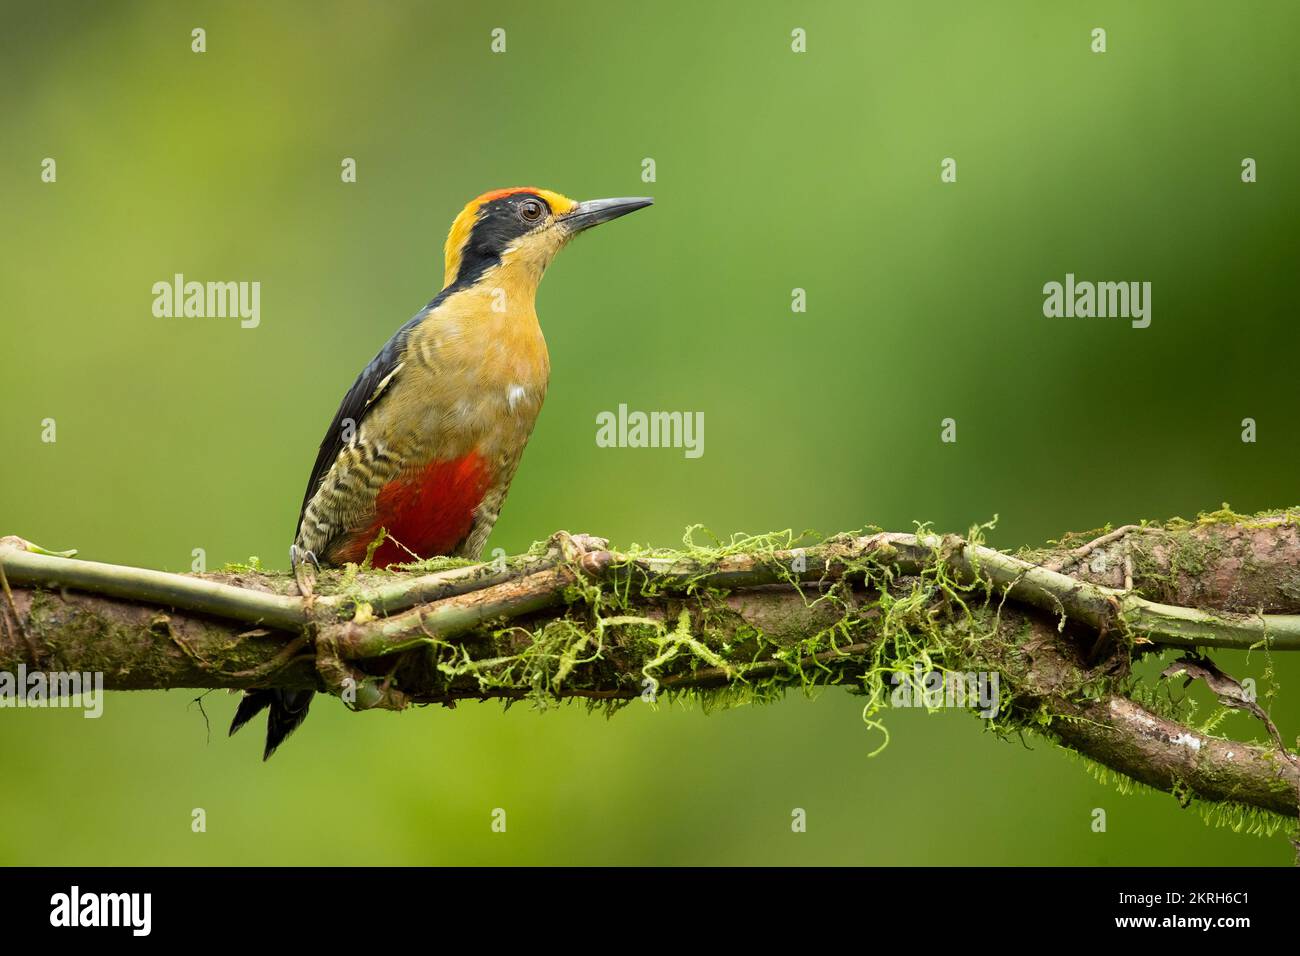 The golden-naped woodpecker (Melanerpes chrysauchen) is a species of bird in the woodpecker family Picidae. Stock Photo